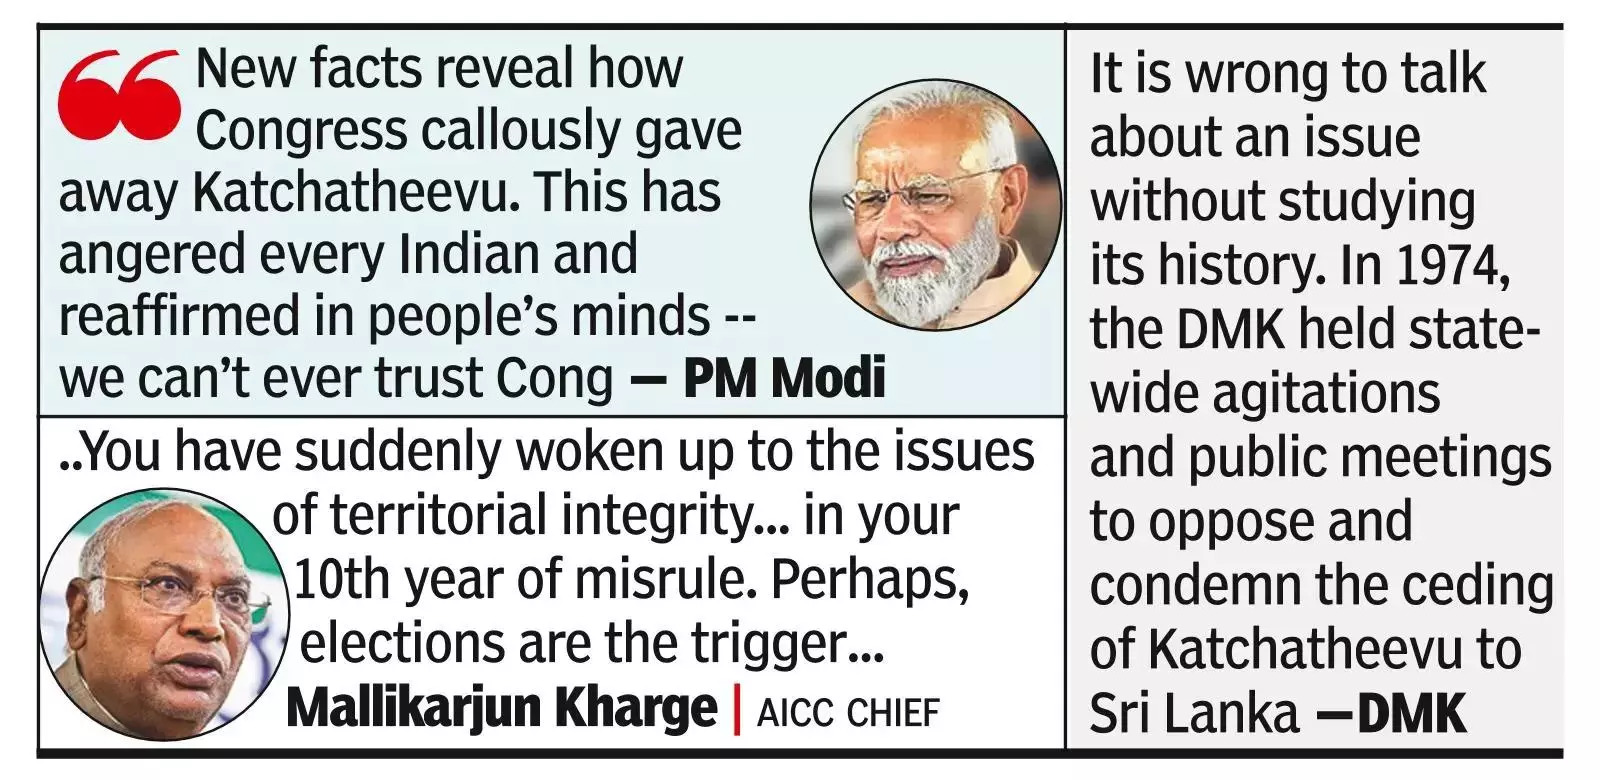 PM Modi leads BJP’s attack on Cong over Katchatheevu issue.